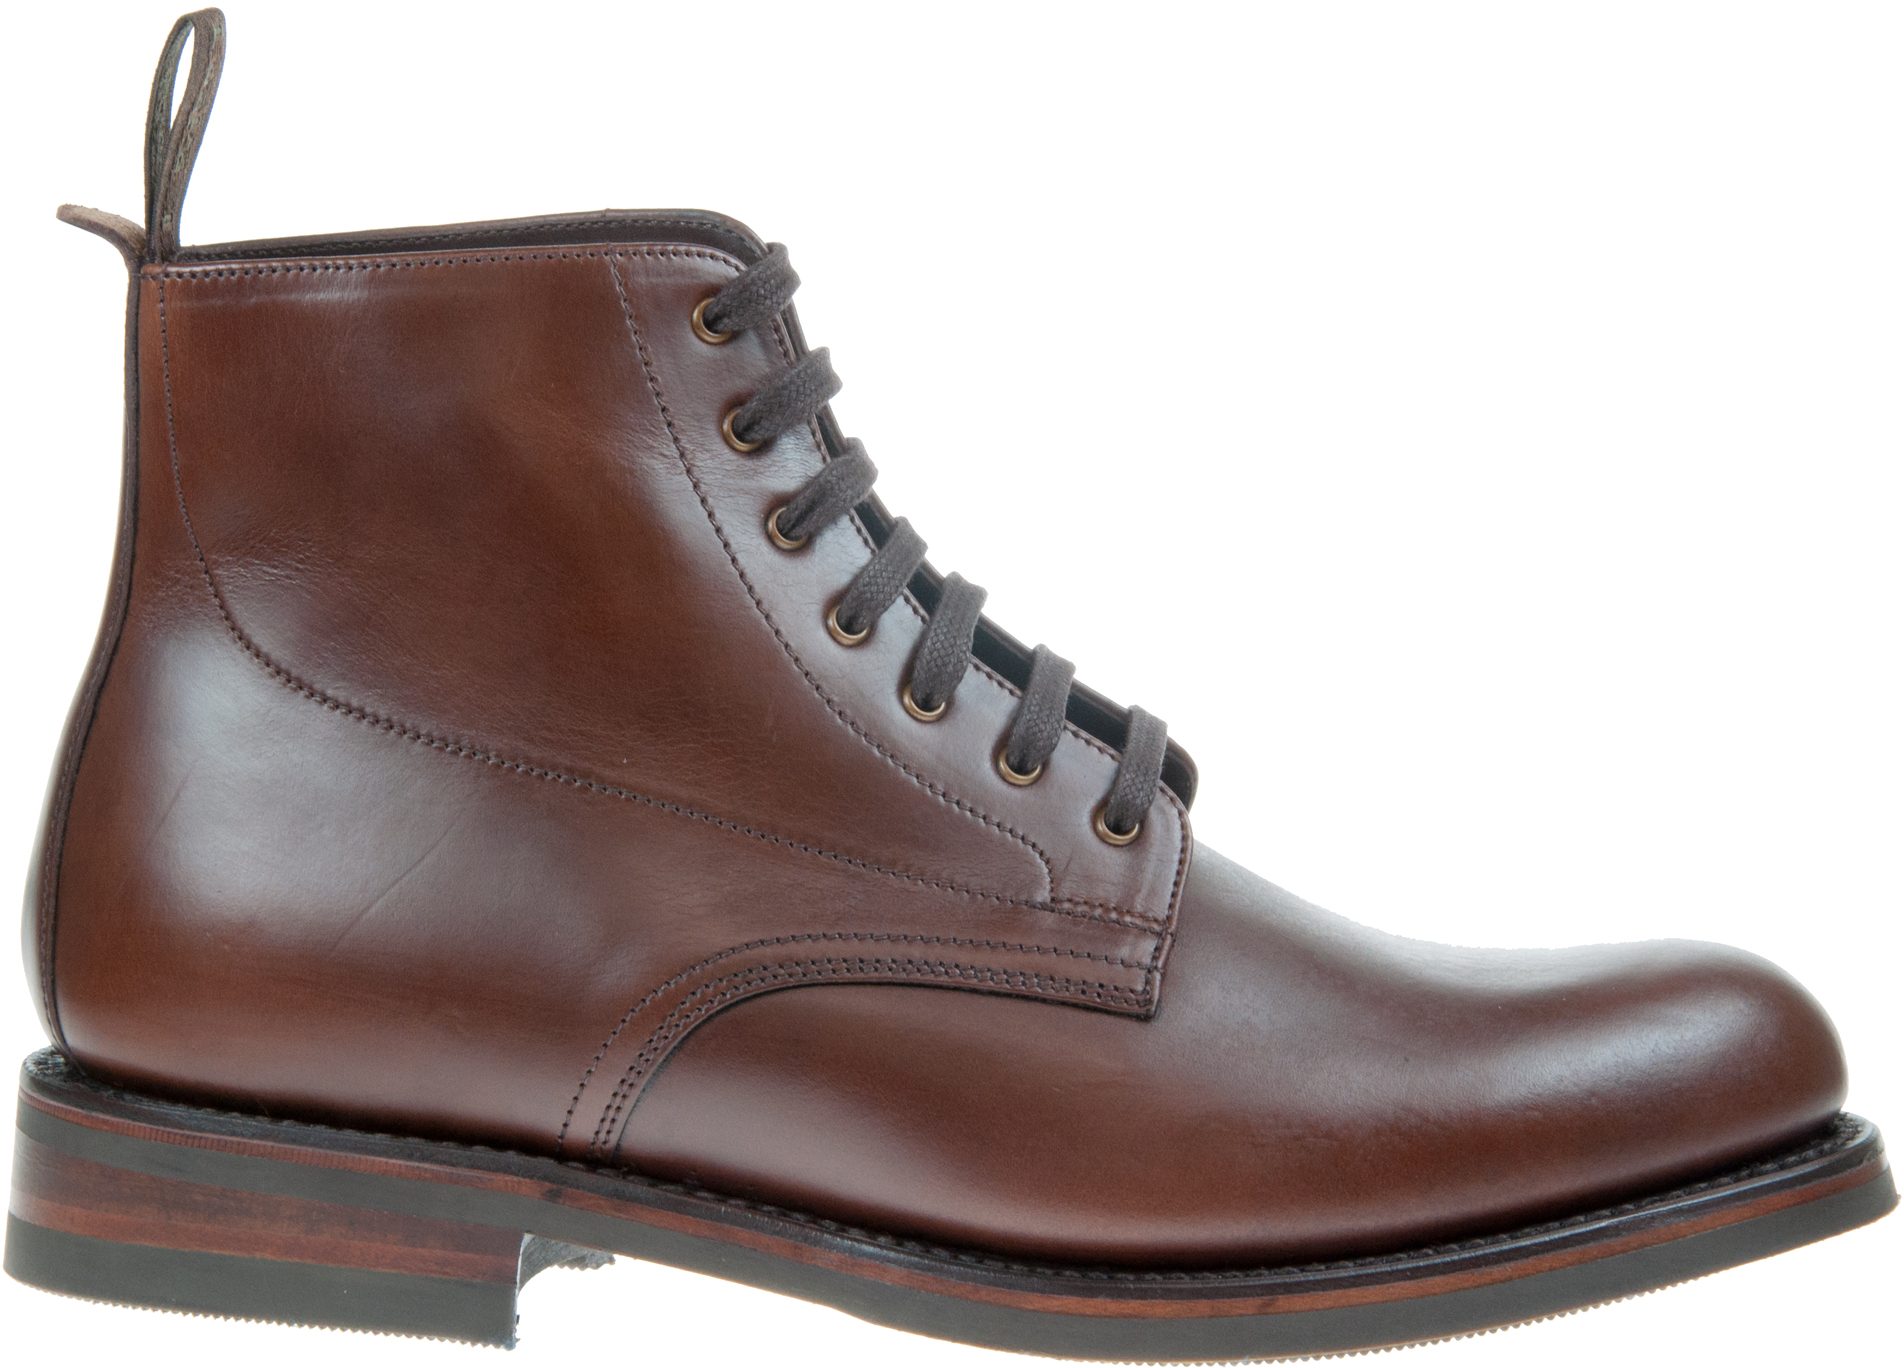 Loake Hebden Dark Brown Chromexcel Leather - Formal Boots - Humphries Shoes